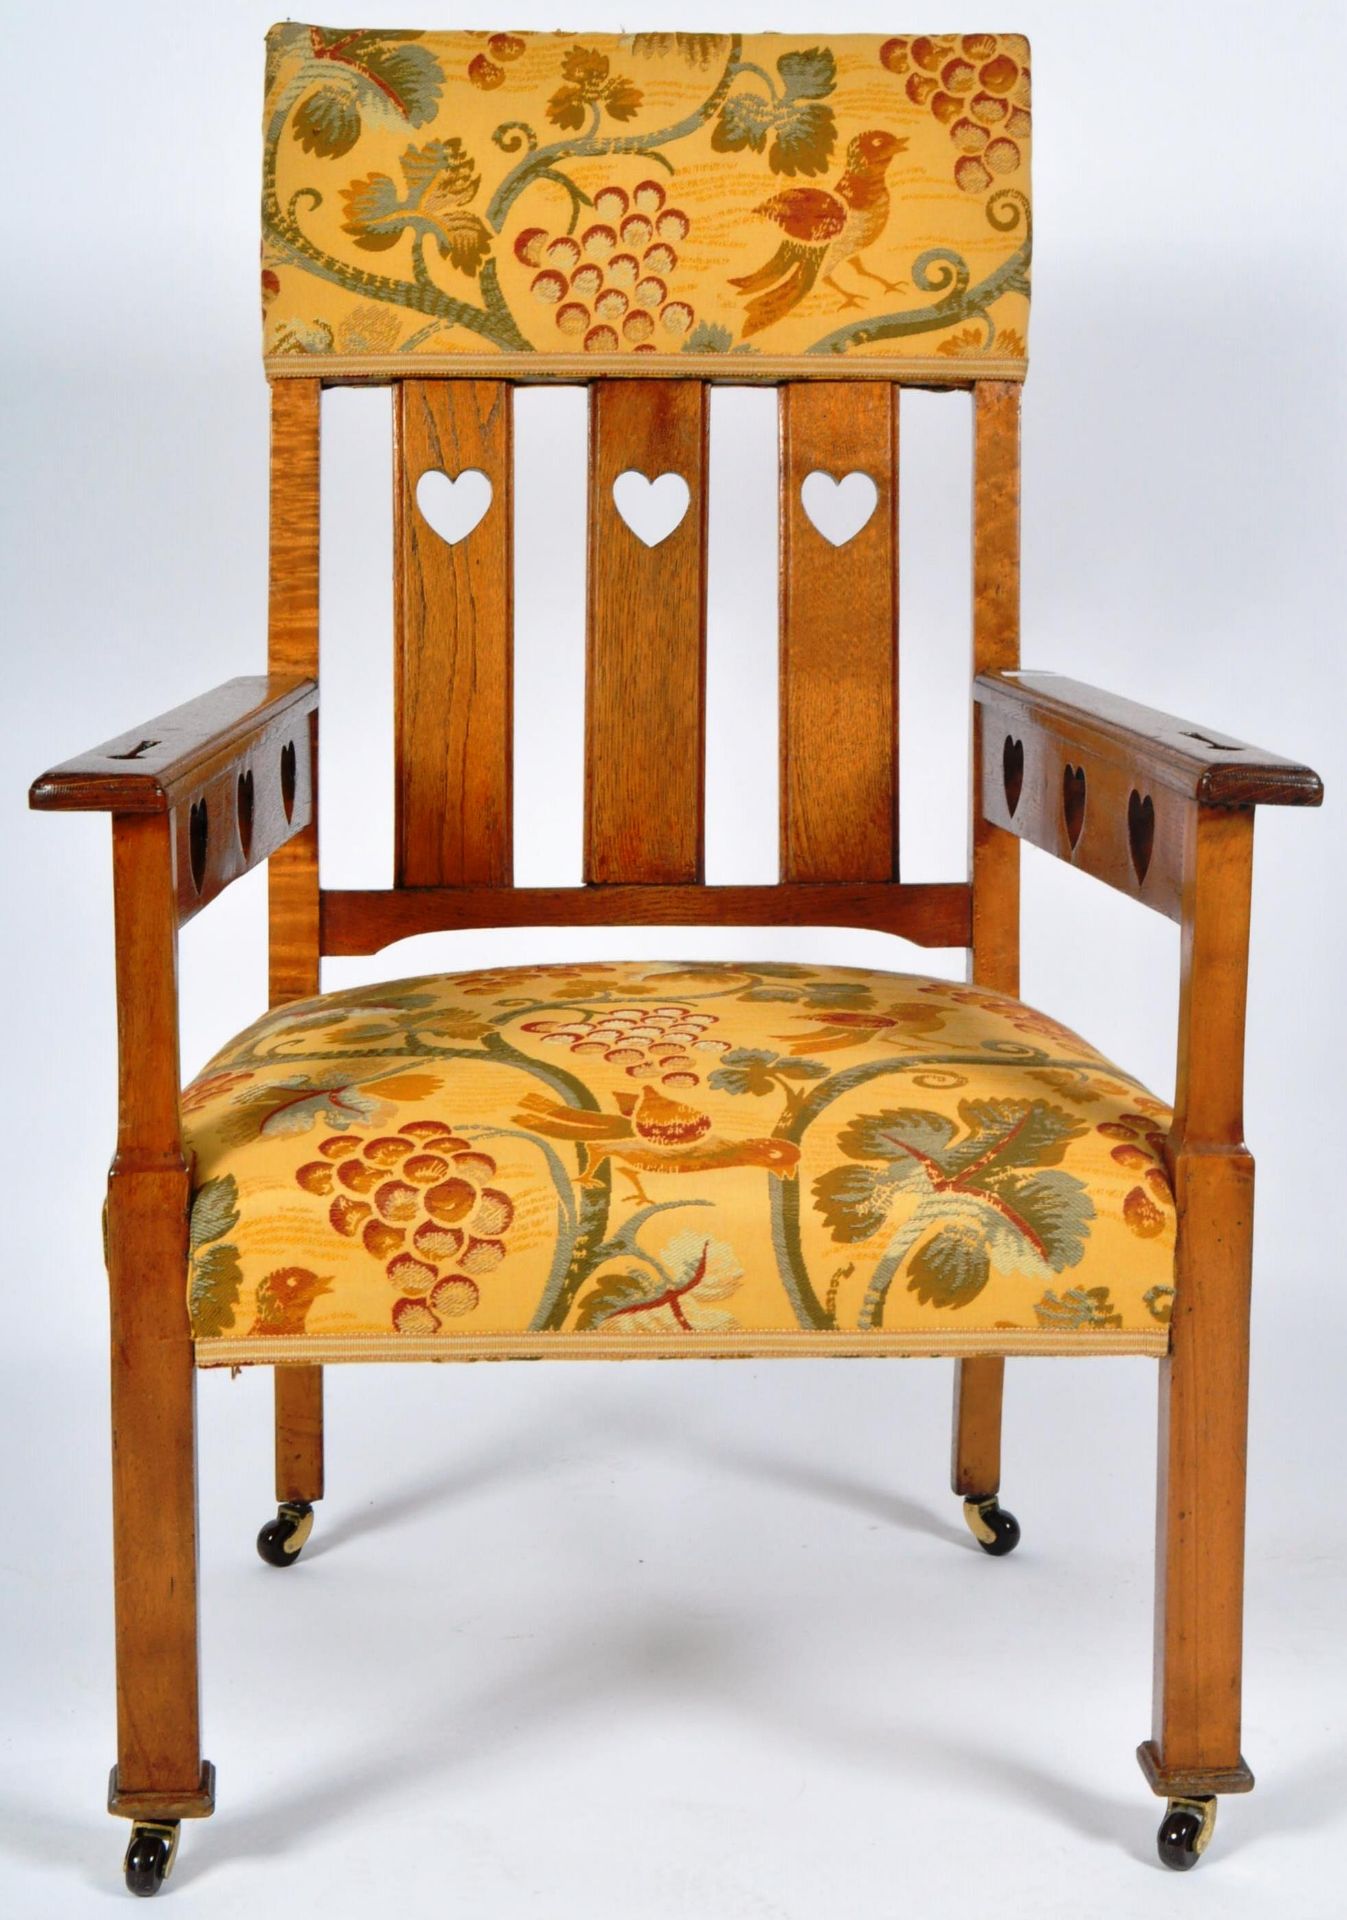 20TH CENTURY ARTS & CRAFTS ARMCHAIR IN THE MANNER OF CFA VOYSEY - Image 5 of 9